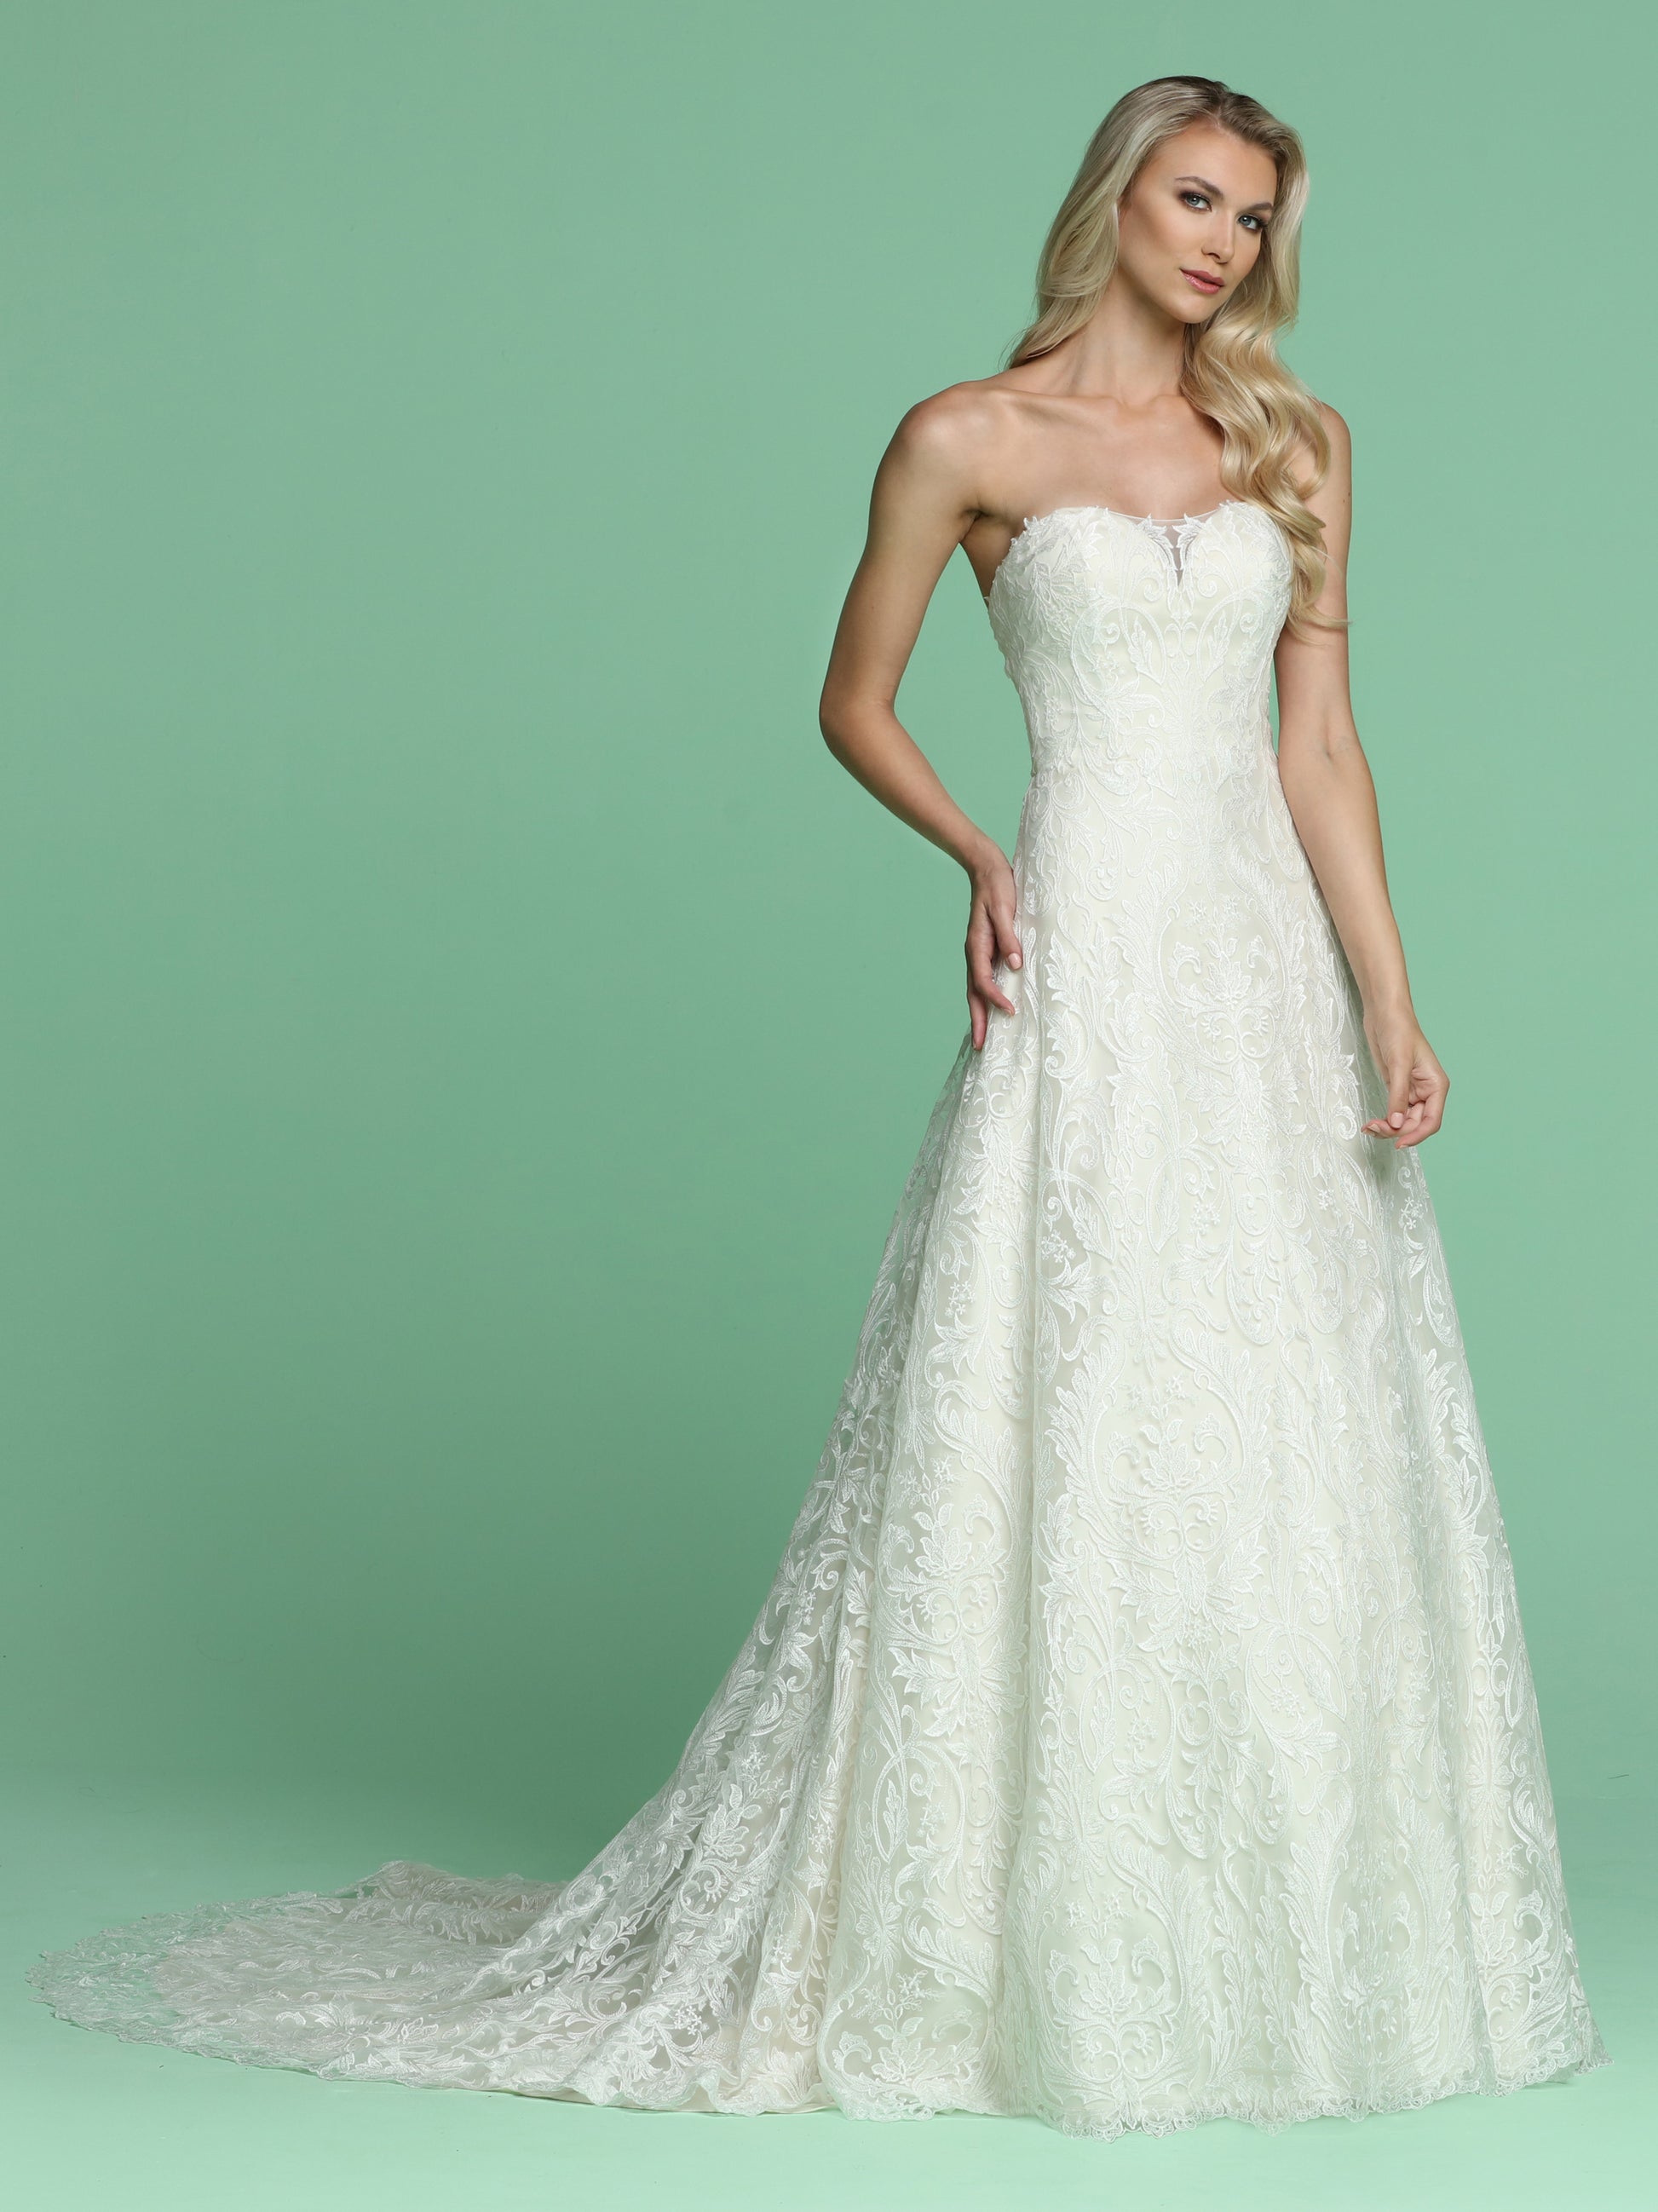 Davinci Bridal 50609 is a beautiful all over lace A Line wedding Dress. This Strapless gown features an illusion sheer sweetheart neckline. Fitted bodice flowing into an a line ballgown with a scallop lace hem. Long Line Lace Up Corset Back. Stunning sweeping train.   Available for 1-2 Week Delivery!!!  Available Sizes: 2,4,6,8,10,12,14,16,18,20  Available Colors: Ivory/Champagne, Ivory/Ivory